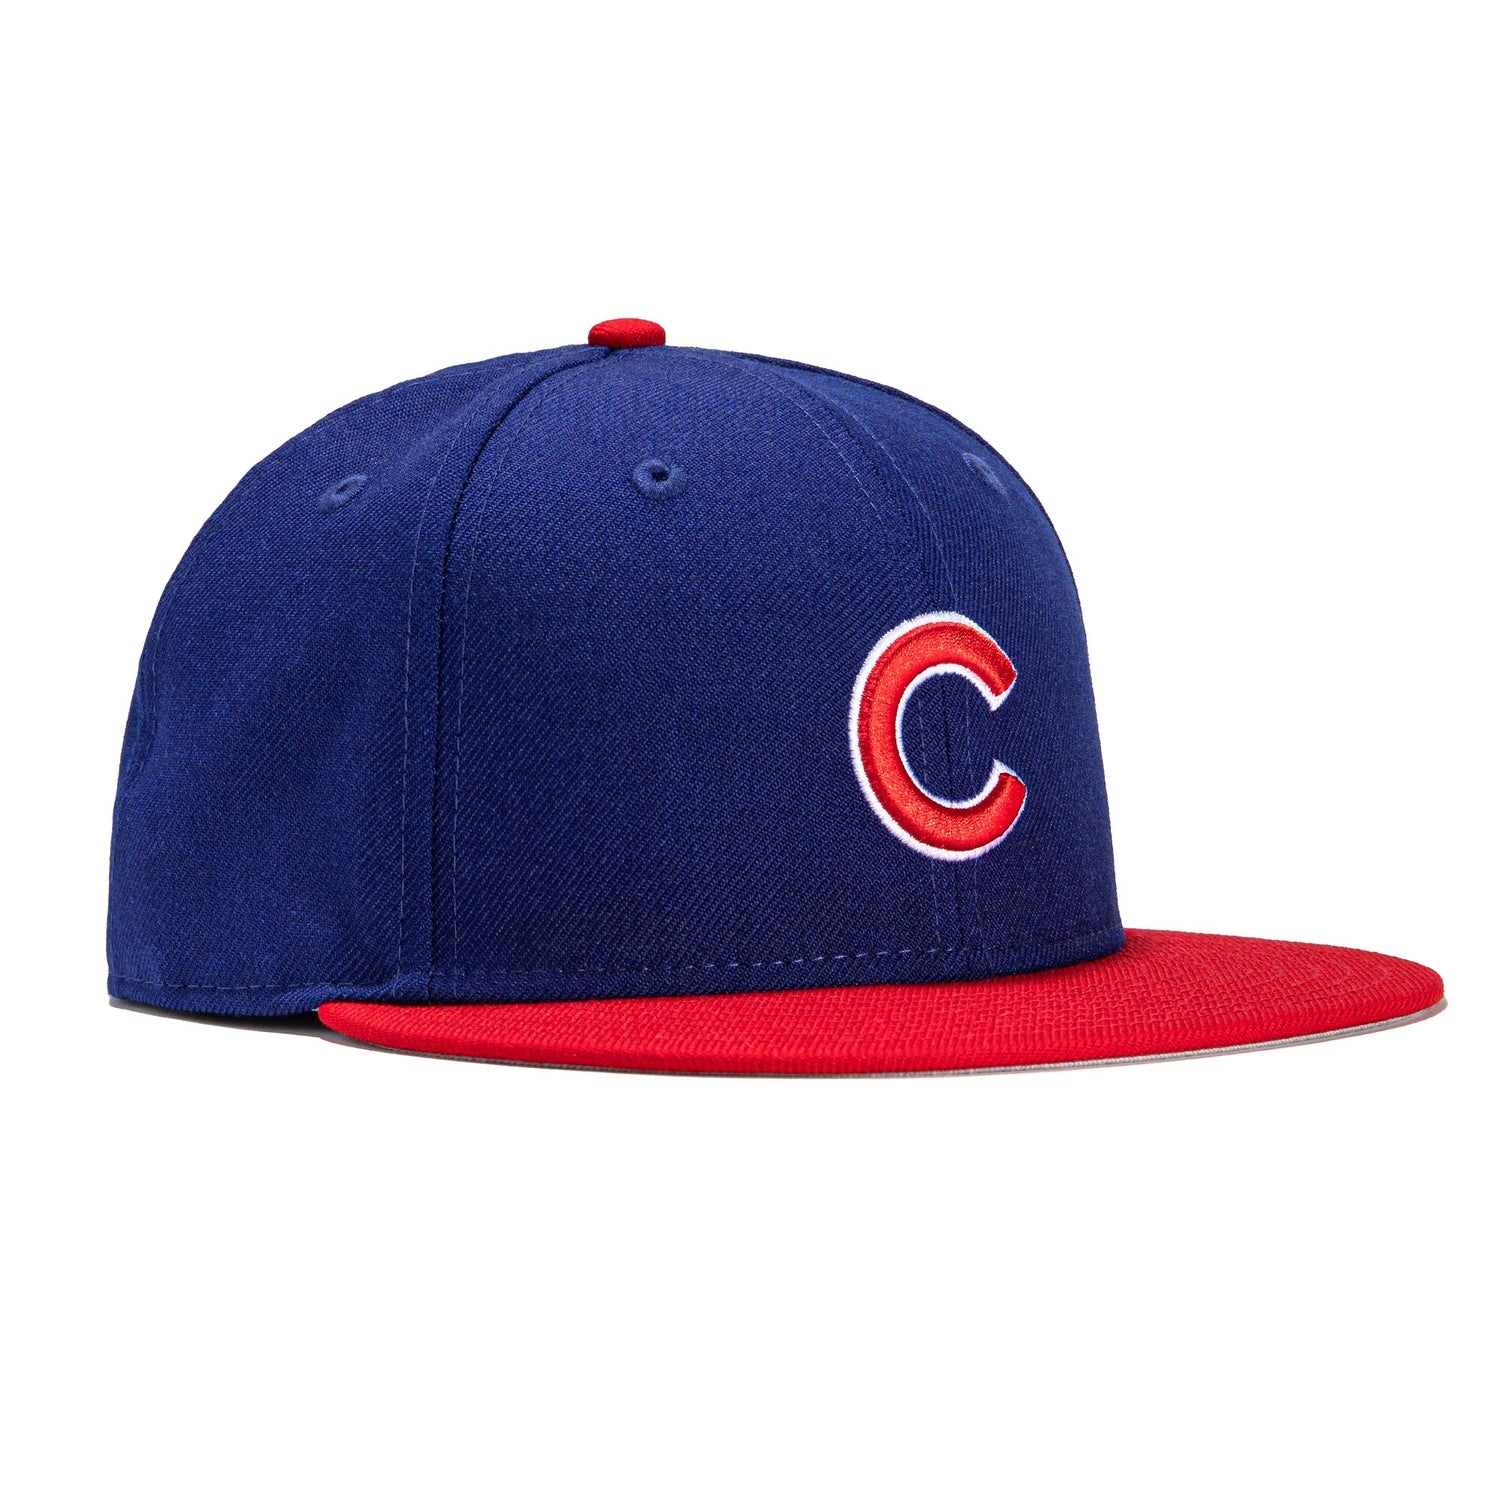 Chicago Cubs Authentic On-Field Alternate Blue Jersey